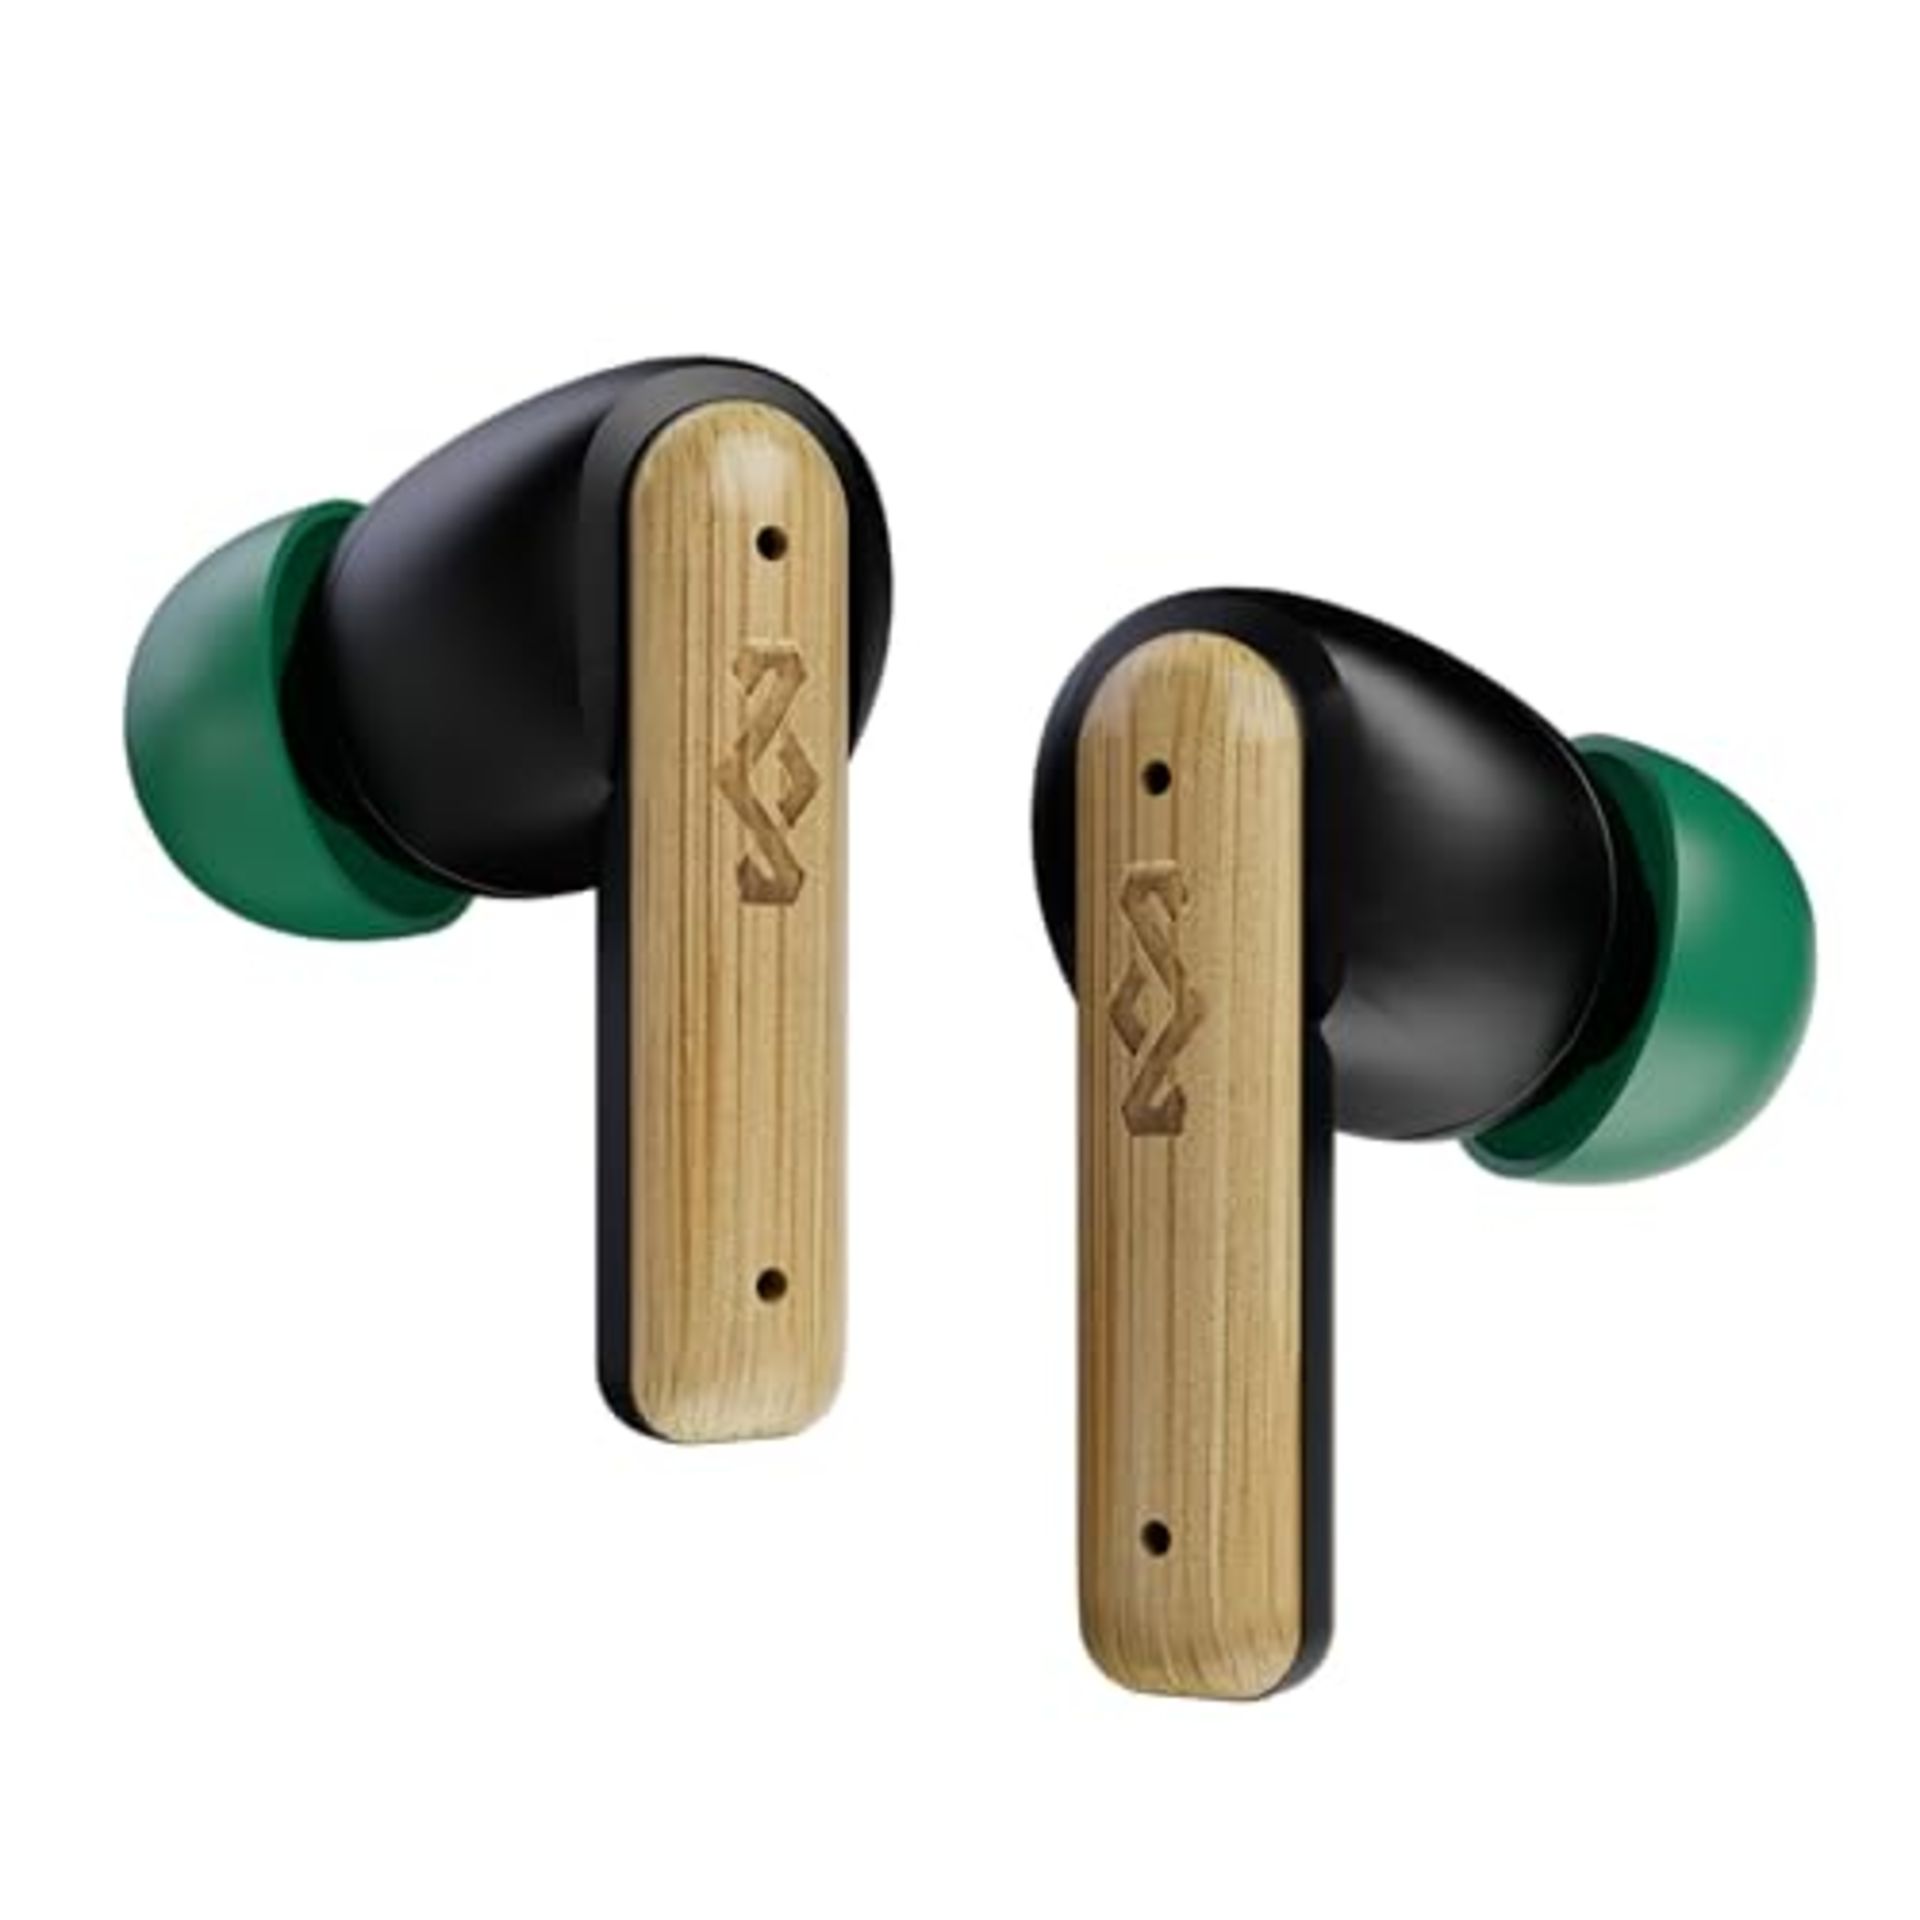 House of Marley Little Bird True Wireless Earbuds, Touch Controls, Built-in Microphone - Image 4 of 6